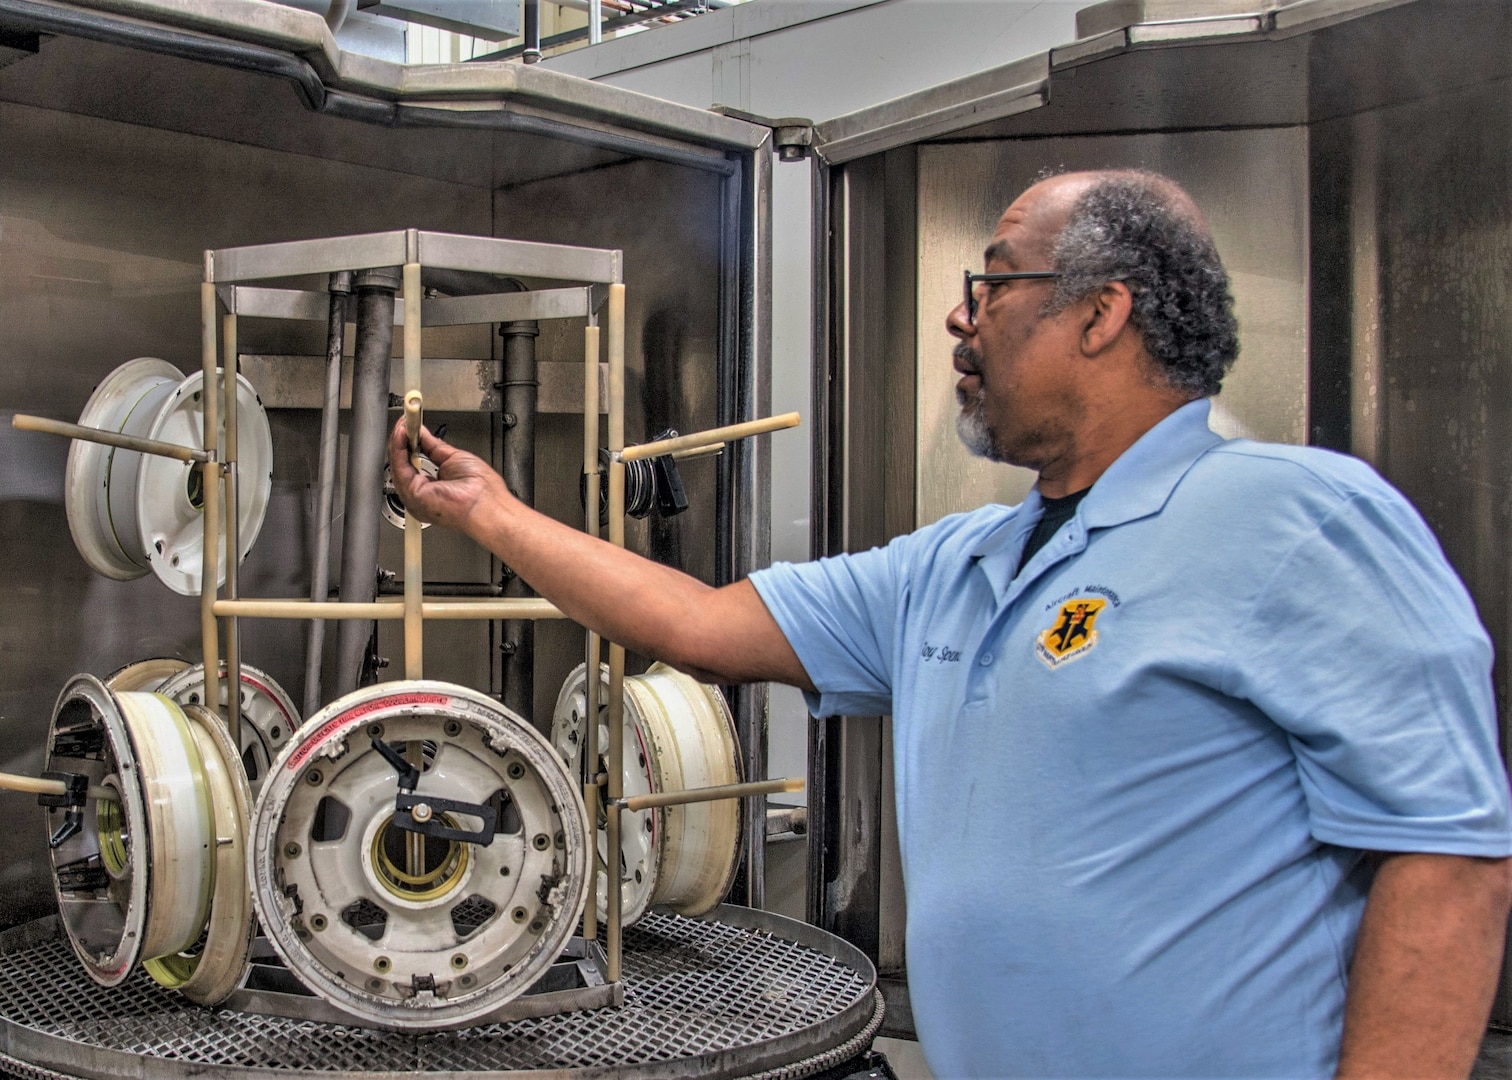 Roy Spencer, 12th Maintenance Group Aircraft Wheel and Tire Shop technician, inspects seals that were recently washed inside the Aircraft Wheel and Tire Shop on Feb. 14, 2019, at Joint Base San Antonio-Randolph, Texas. Tire shop technicians and AGE members are part of a team that ensure the integrity of the wheels and tires used on the 12th FTW’s fleet of trainer aircraft. (U.S. Air Force photo by Tech. Sgt. Ave I. Young)